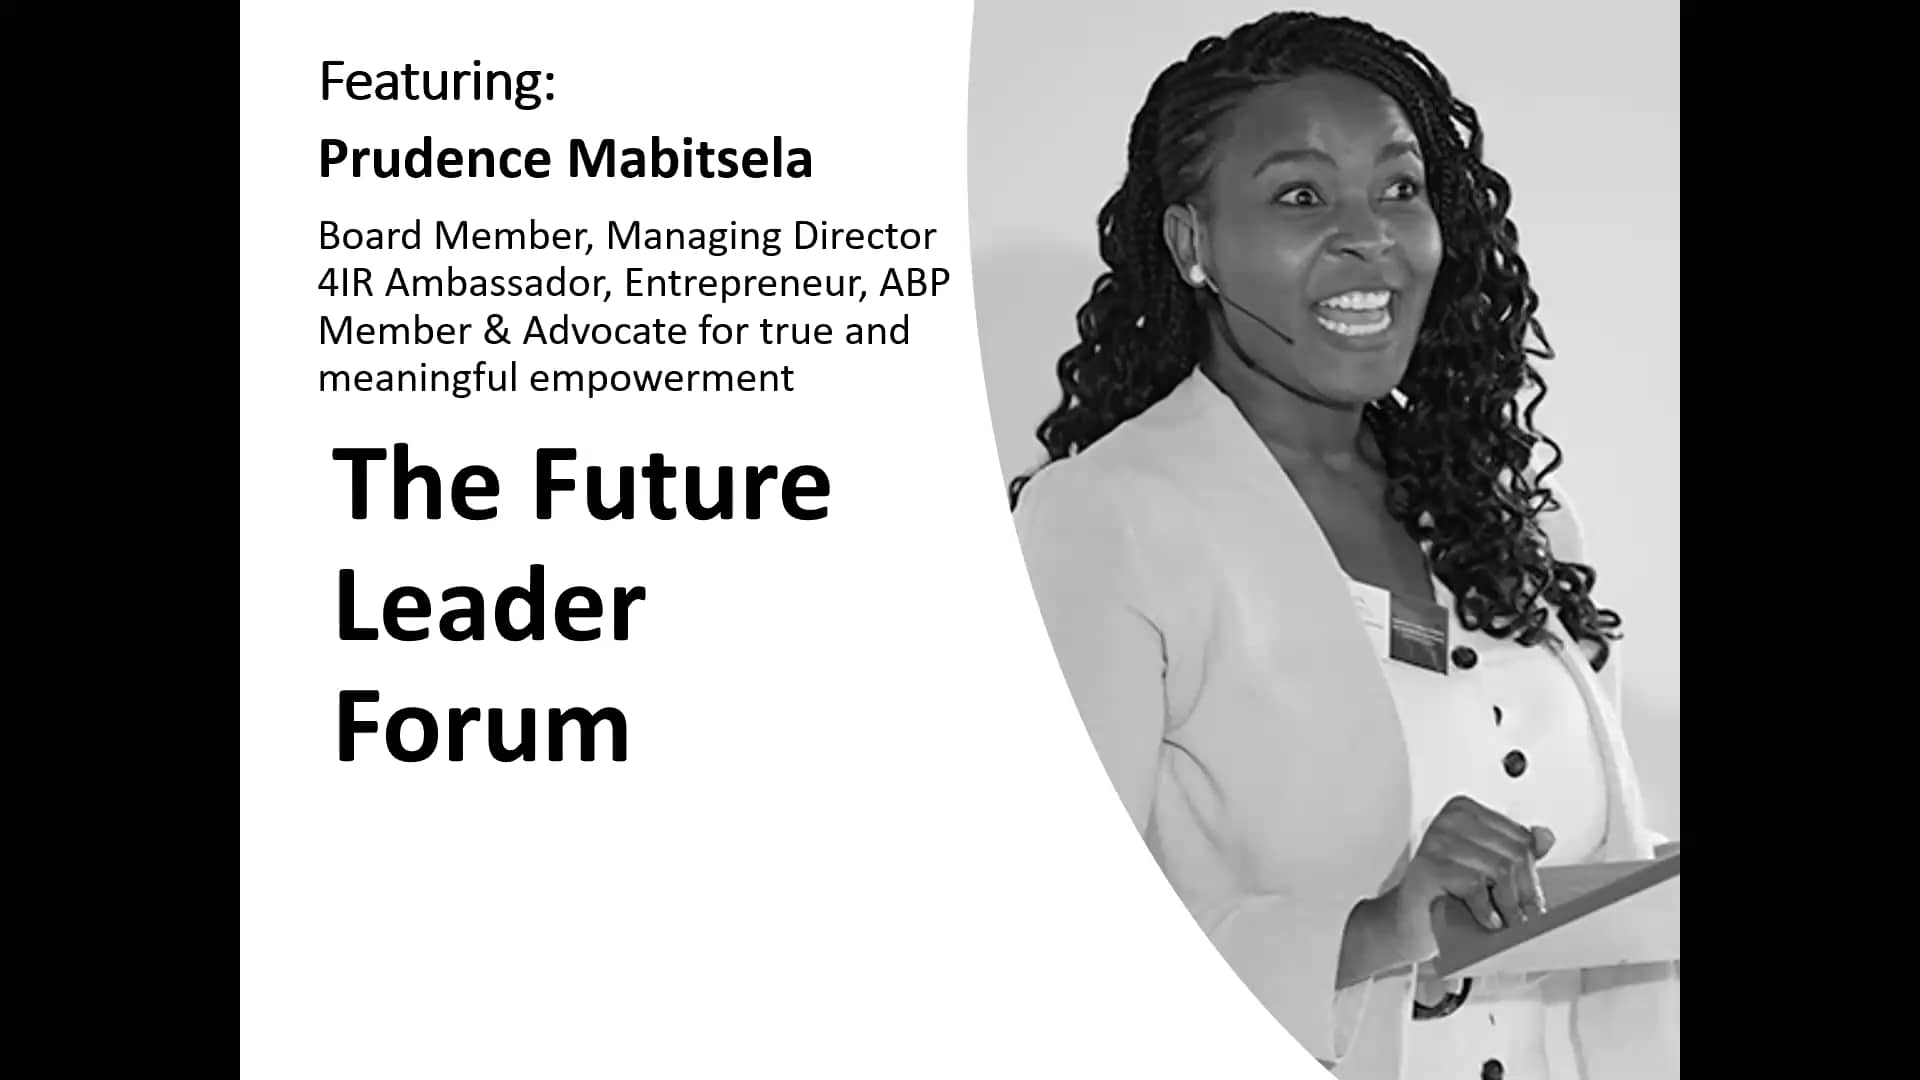 The Future Leader Interview with Prudence Mabitsela on Vimeo